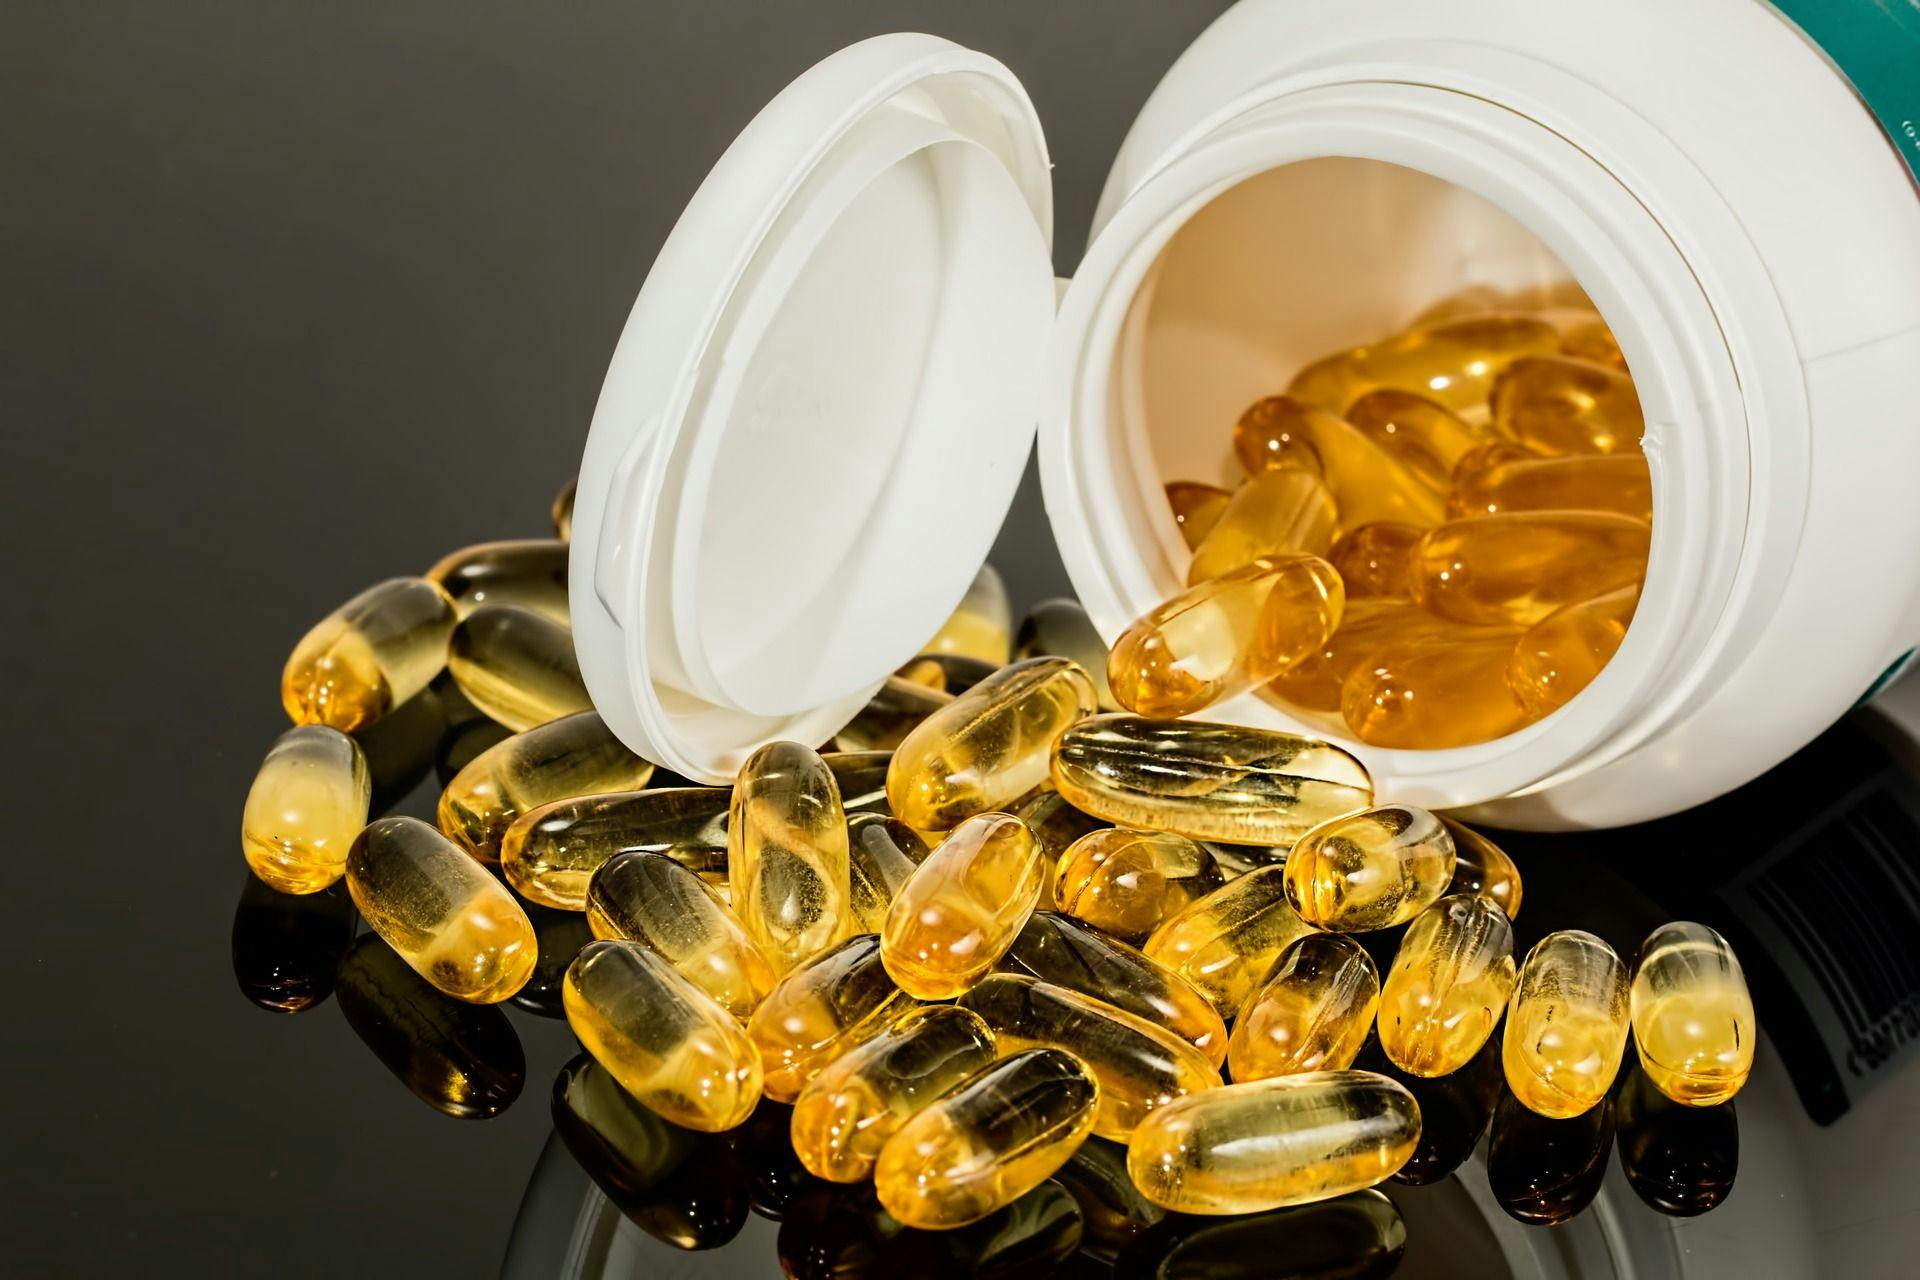 Fish Oil Supplements Linked to Lower Risk of Premature Death, Cardiovascular Disease